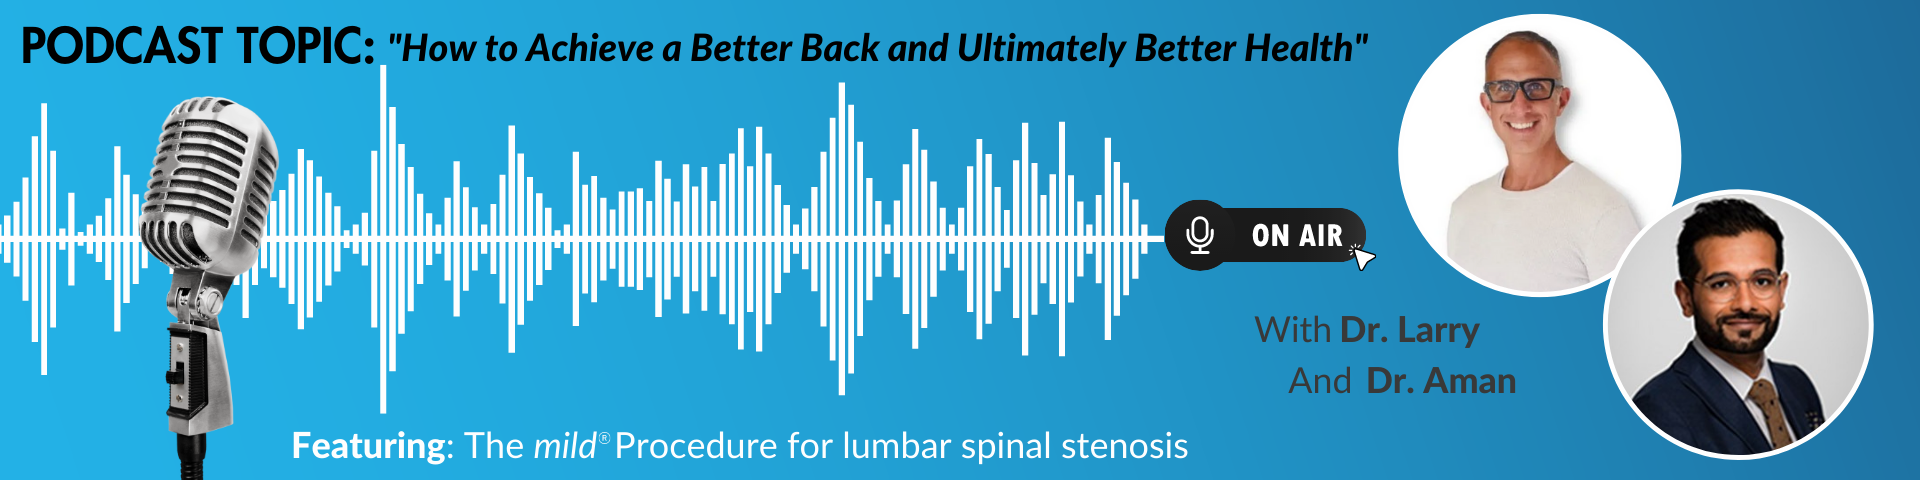 Header Image - Podcast Topic: "How to Achieve a Better Back and Ultimately Better Health." On air with Dr. Larry and Dr. Aman. Featuring: The mild Procedure for lumbar spinal stenosis